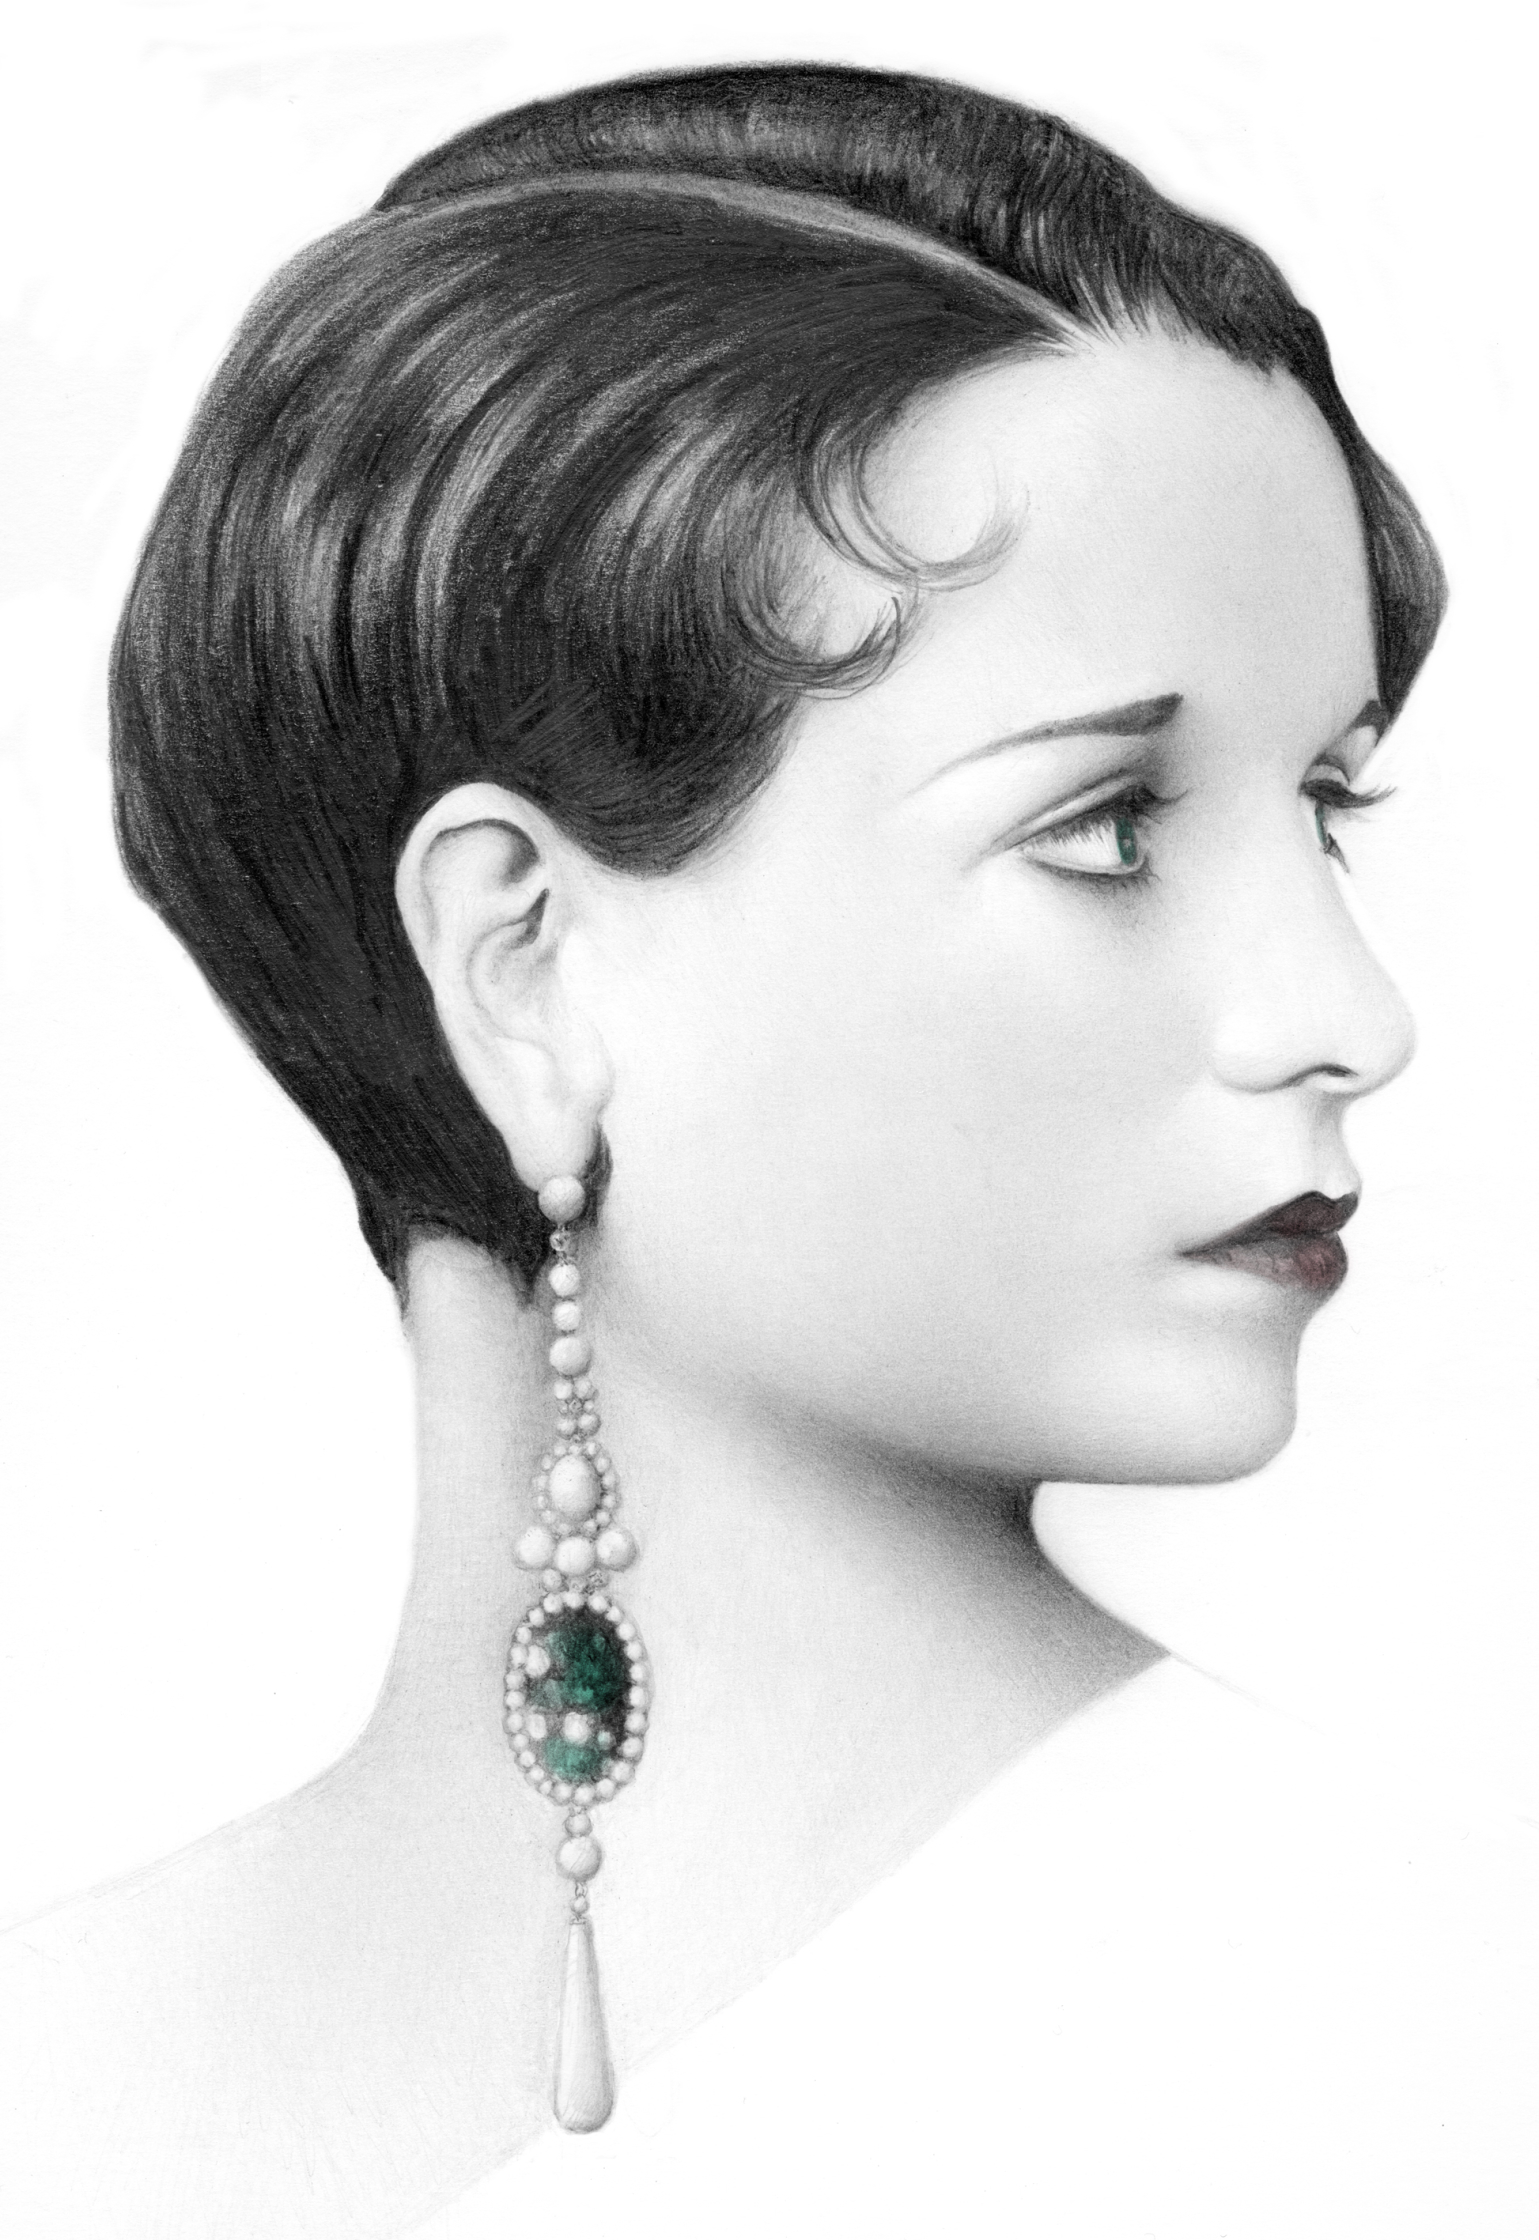 Lady's Profile With Large Earring